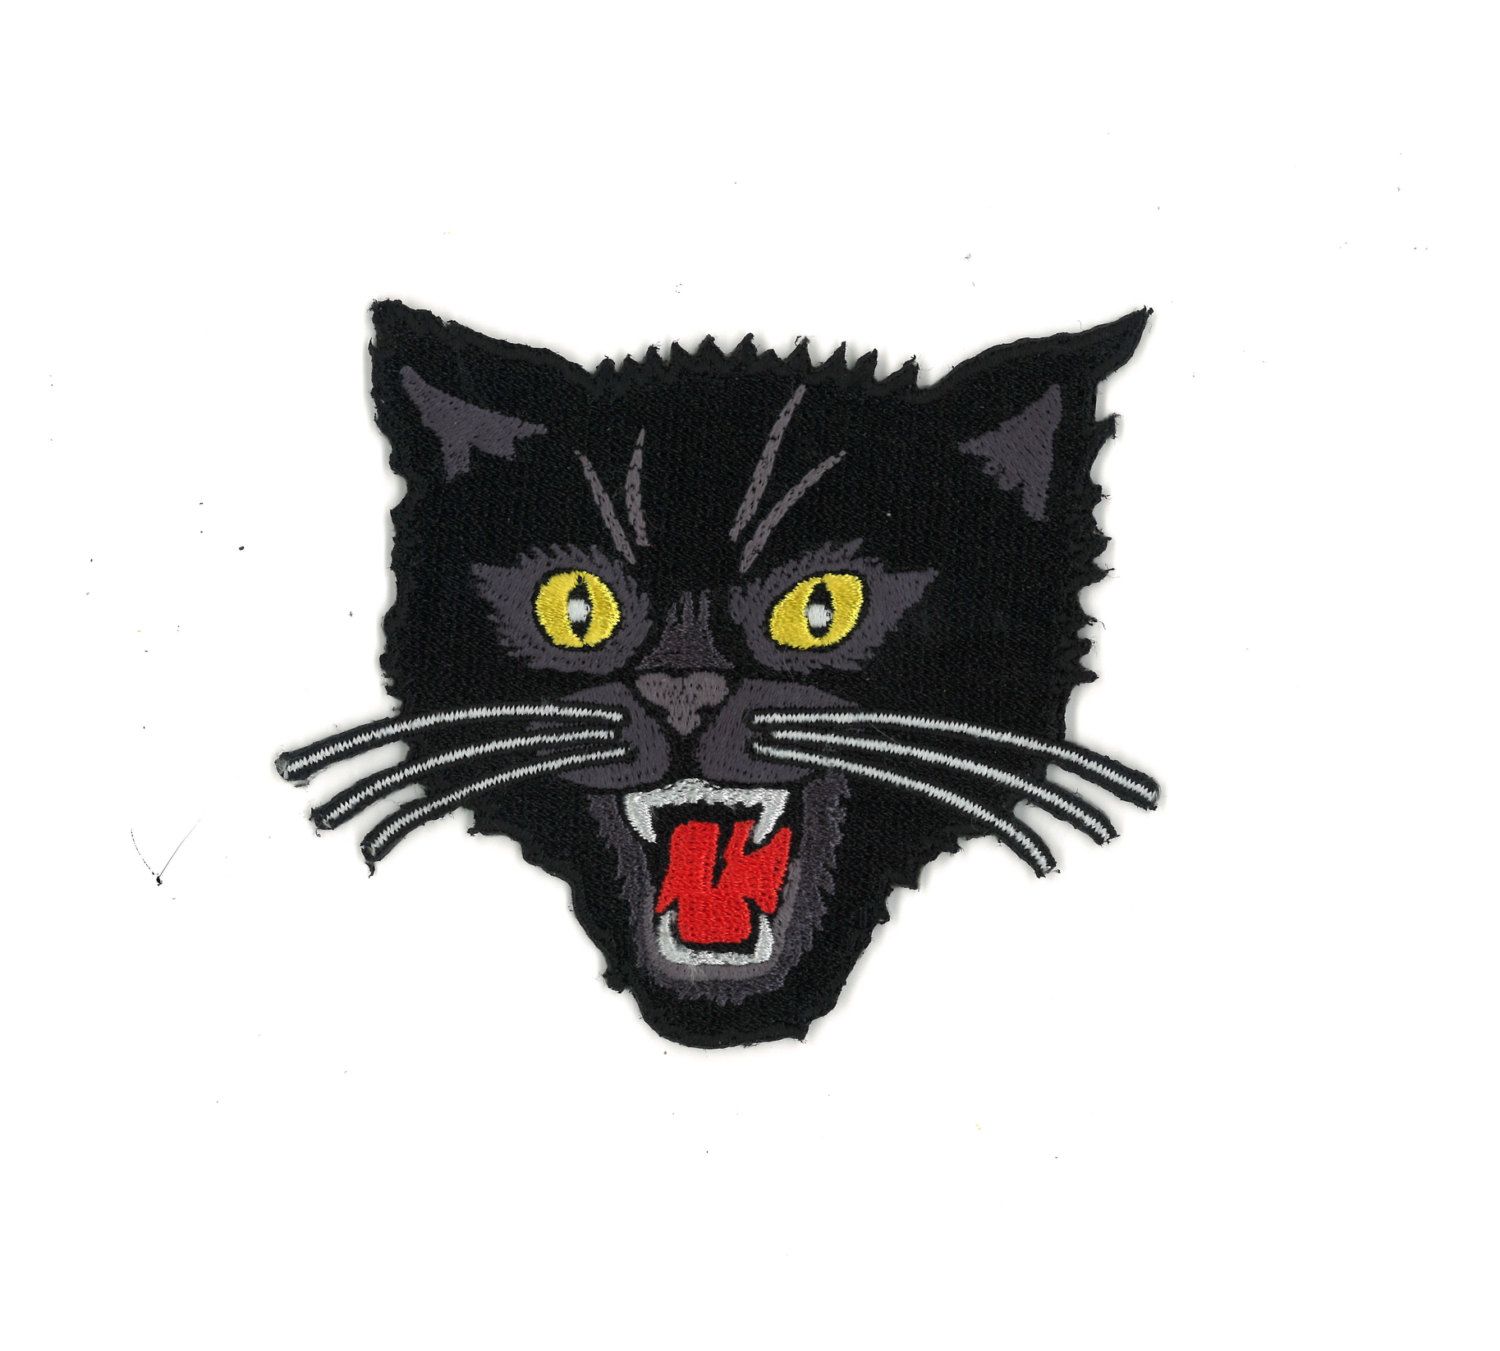 3.5 Angry Black Cat Iron-on Patch Rockabilly